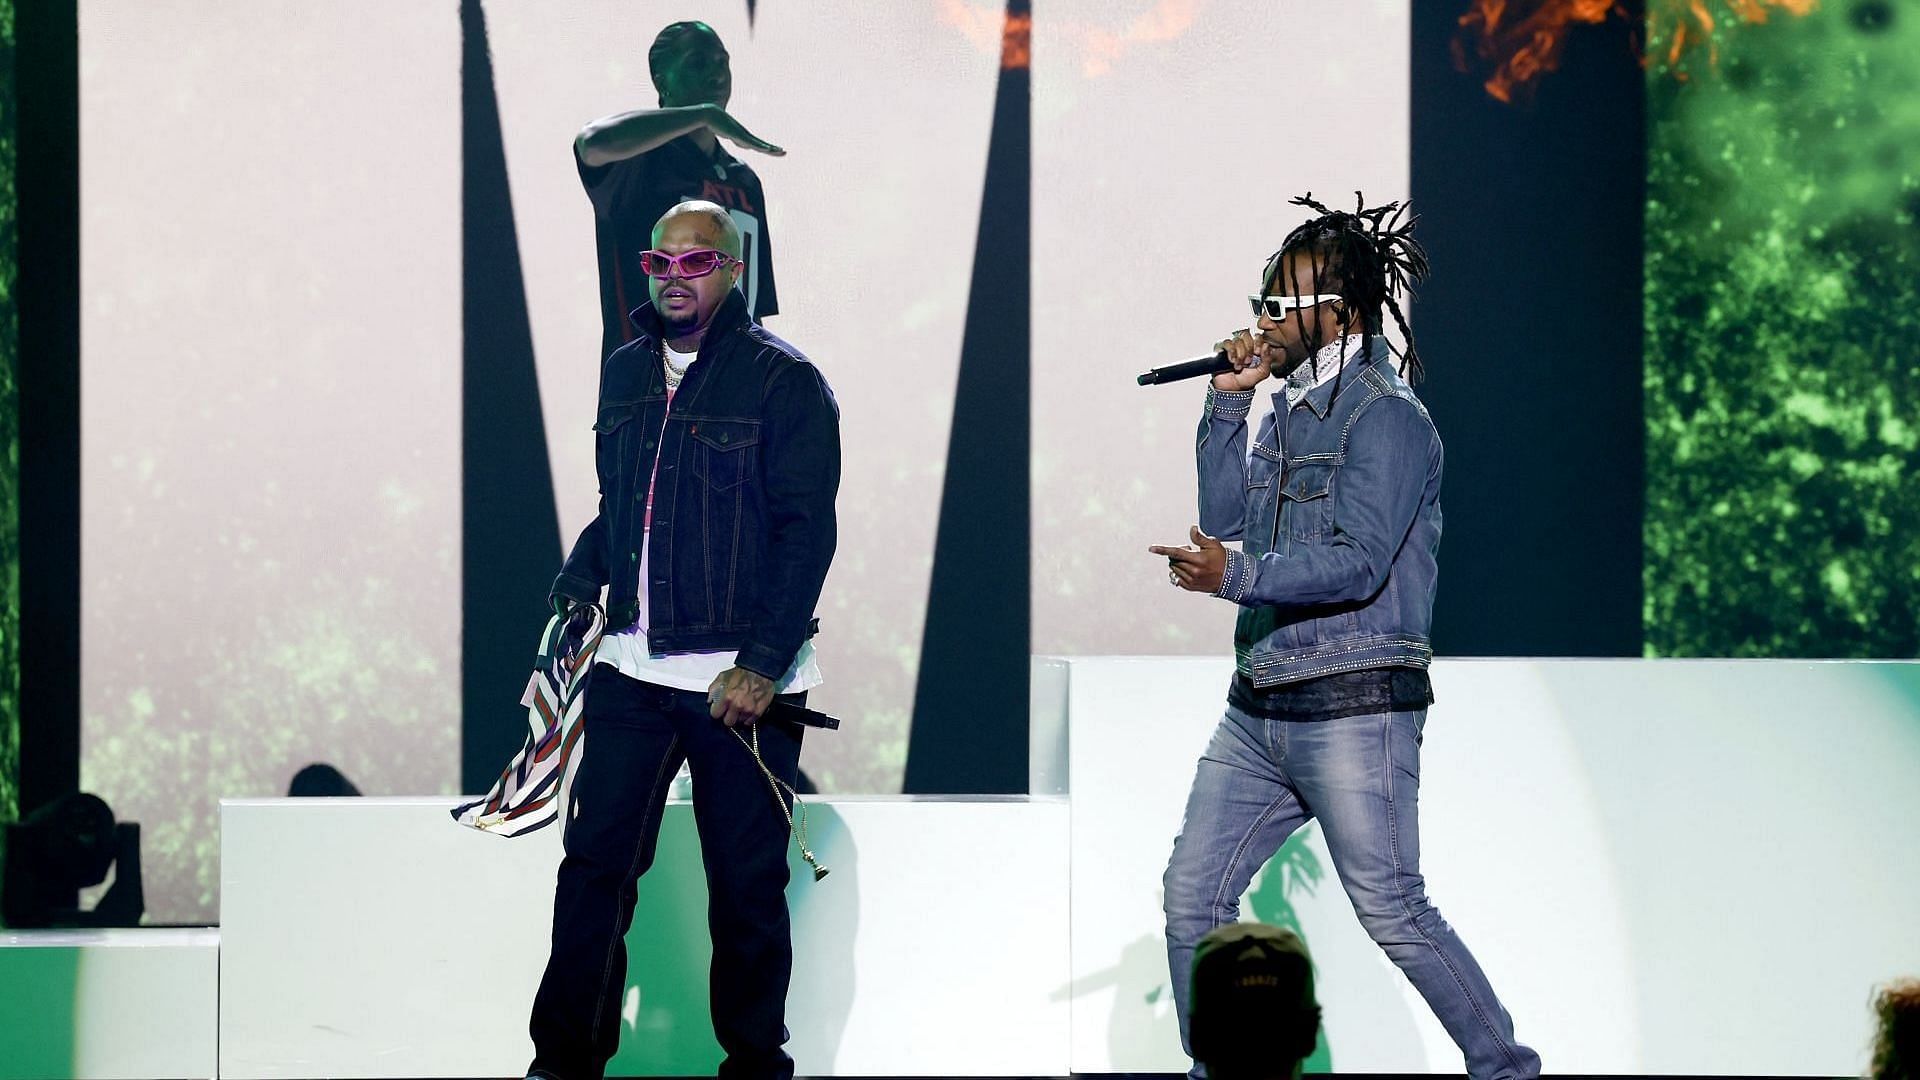 (L-R) DJ Paul and Juicy J of Three 6 Mafia perform onstage during A GRAMMY Salute to 50 Years of Hip-Hop at YouTube Theater on November 08, 2023, in Inglewood, California. (Photo by Frazer Harrison/Getty Images for The Recording Academy)